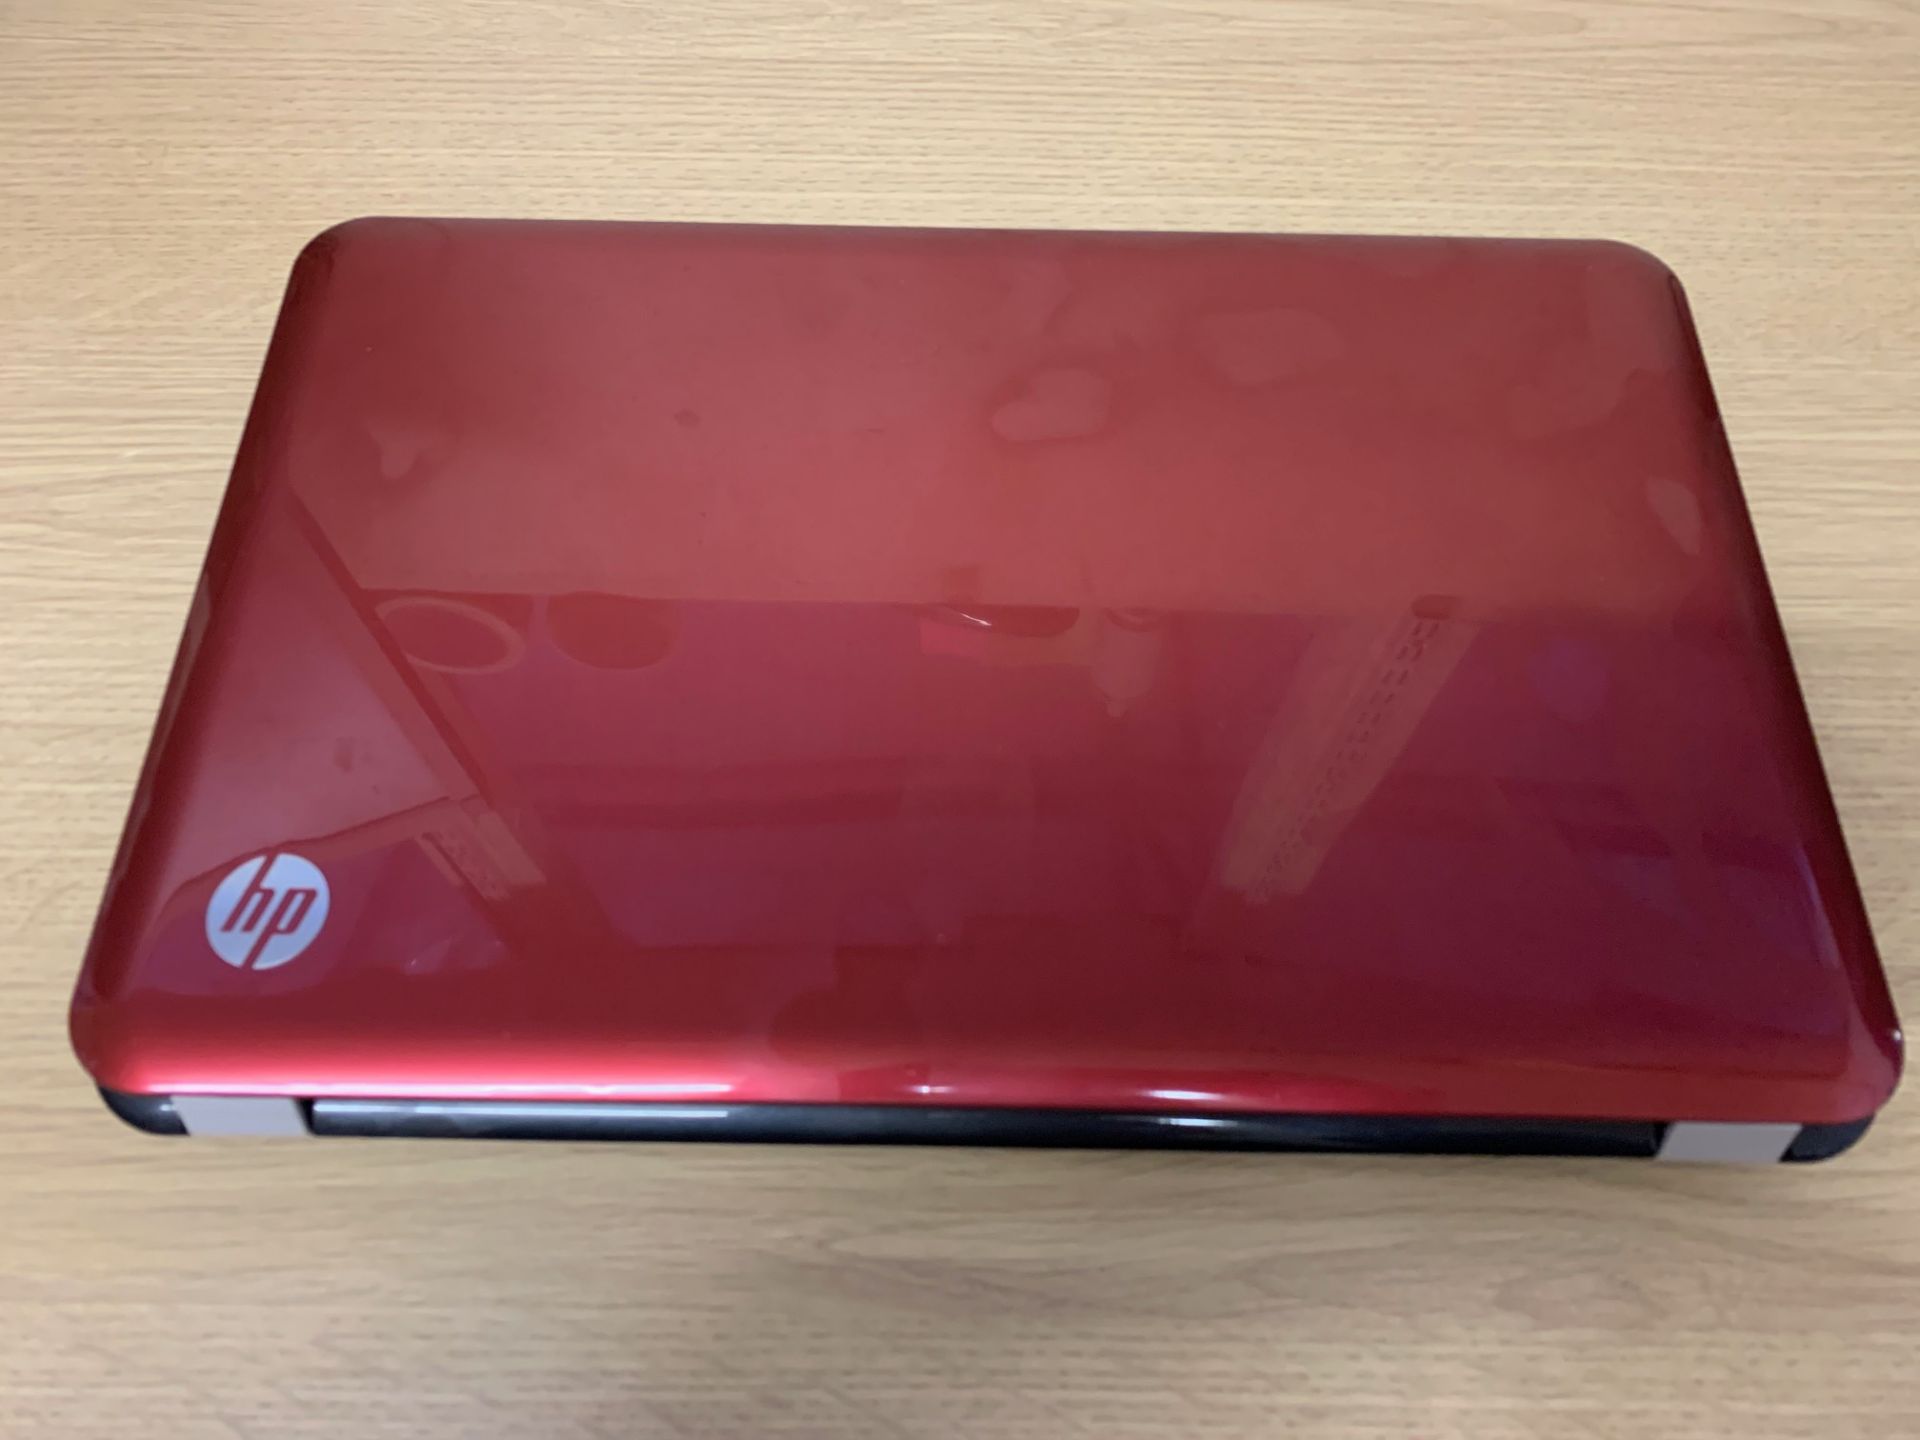 HP Pavilion G6 Laptop - i3 2nd Generation, 500GB Hard Drive, 4GB RAM, 15.6" Screen, Loaded With - Image 3 of 4